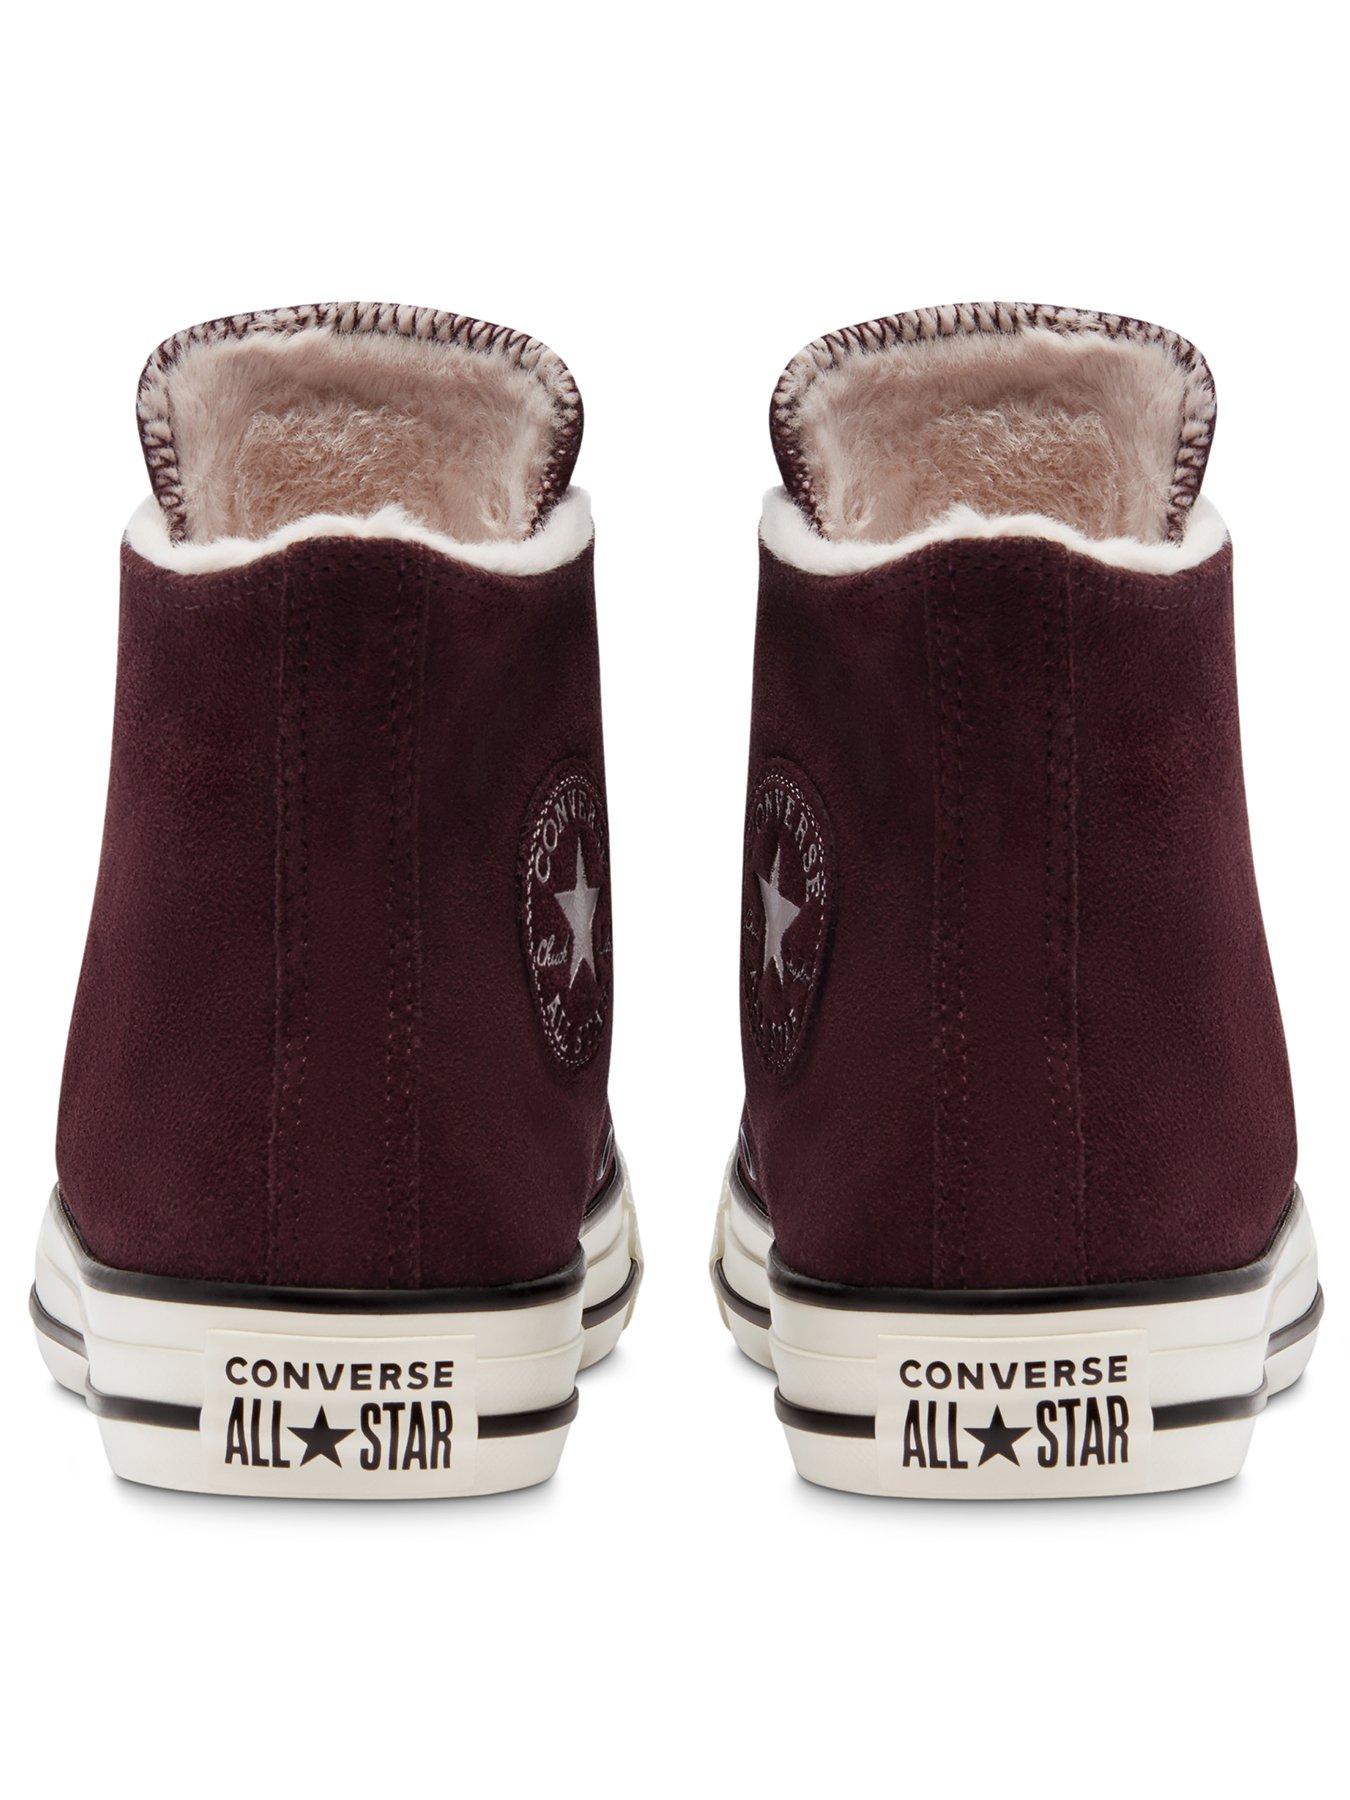 converse with fur